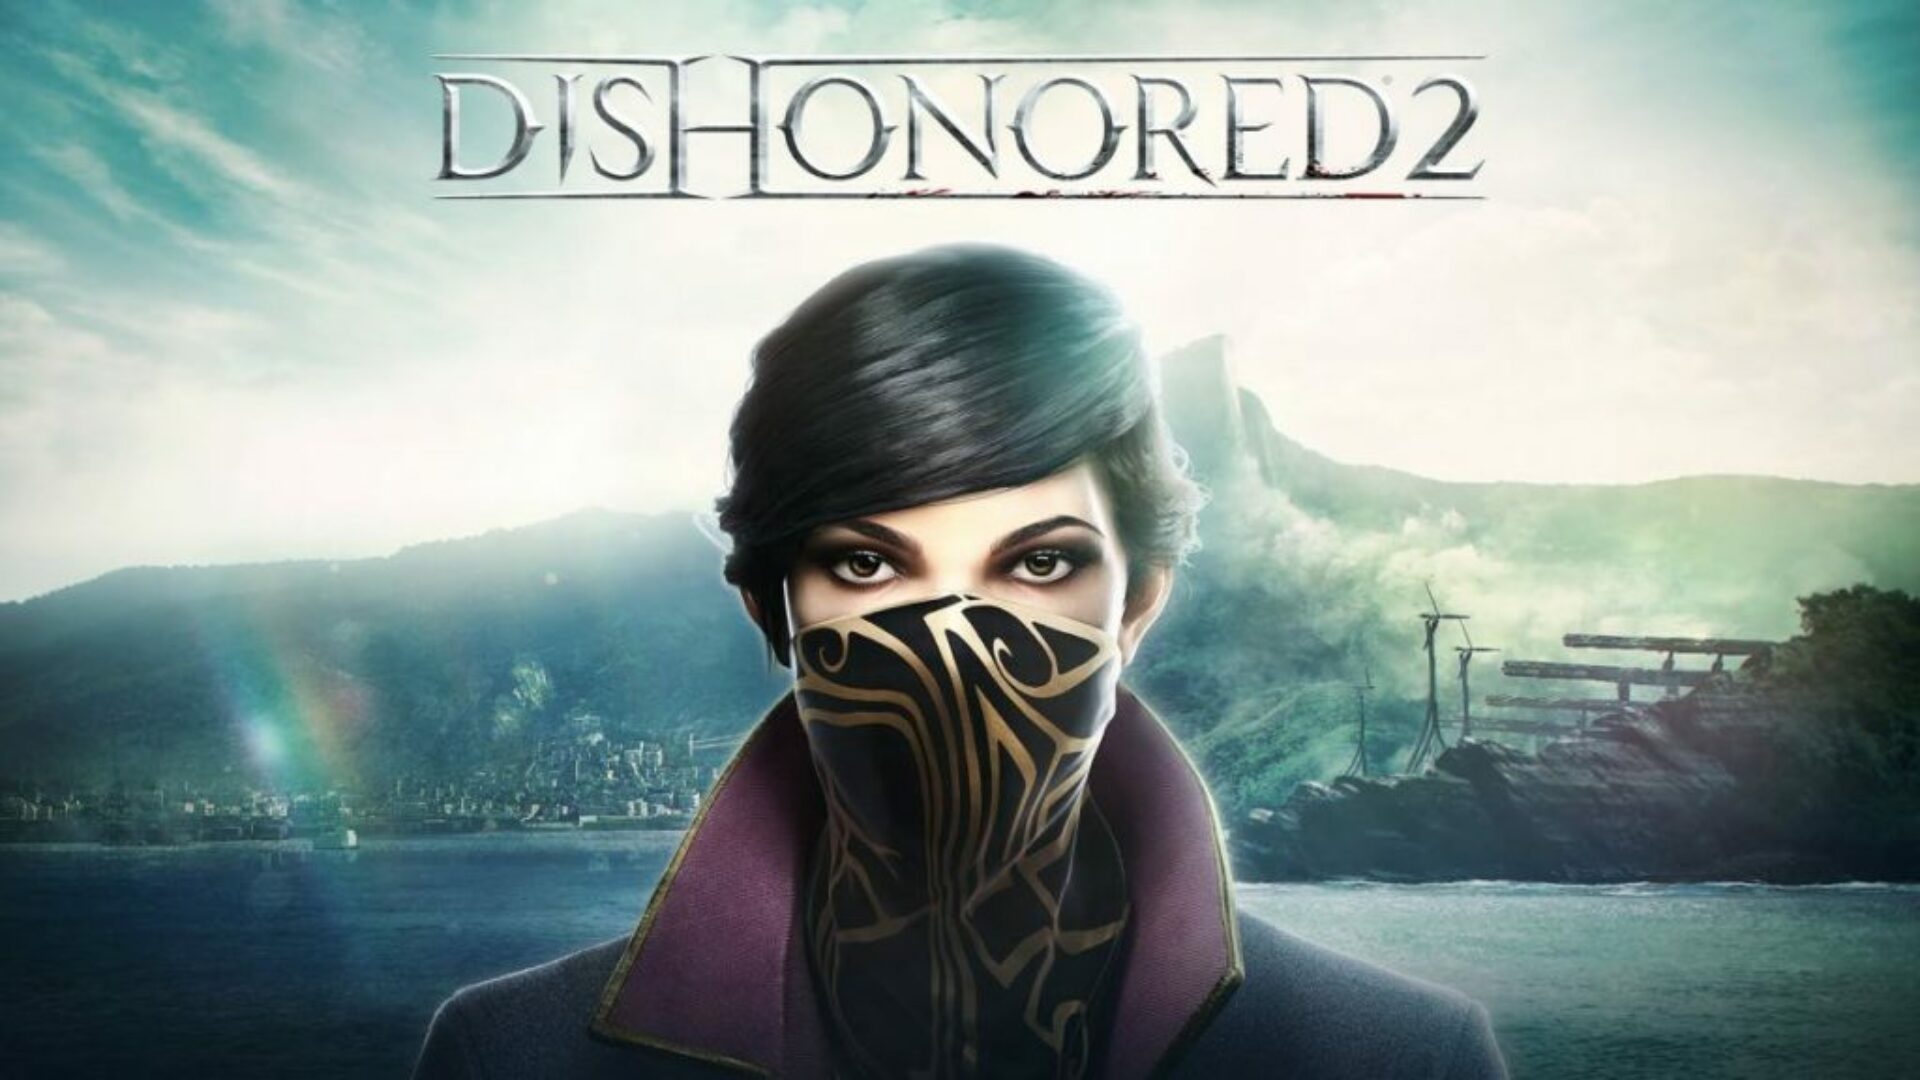 QuakeCon 2016 Shows off New Dishonored 2 Gameplay